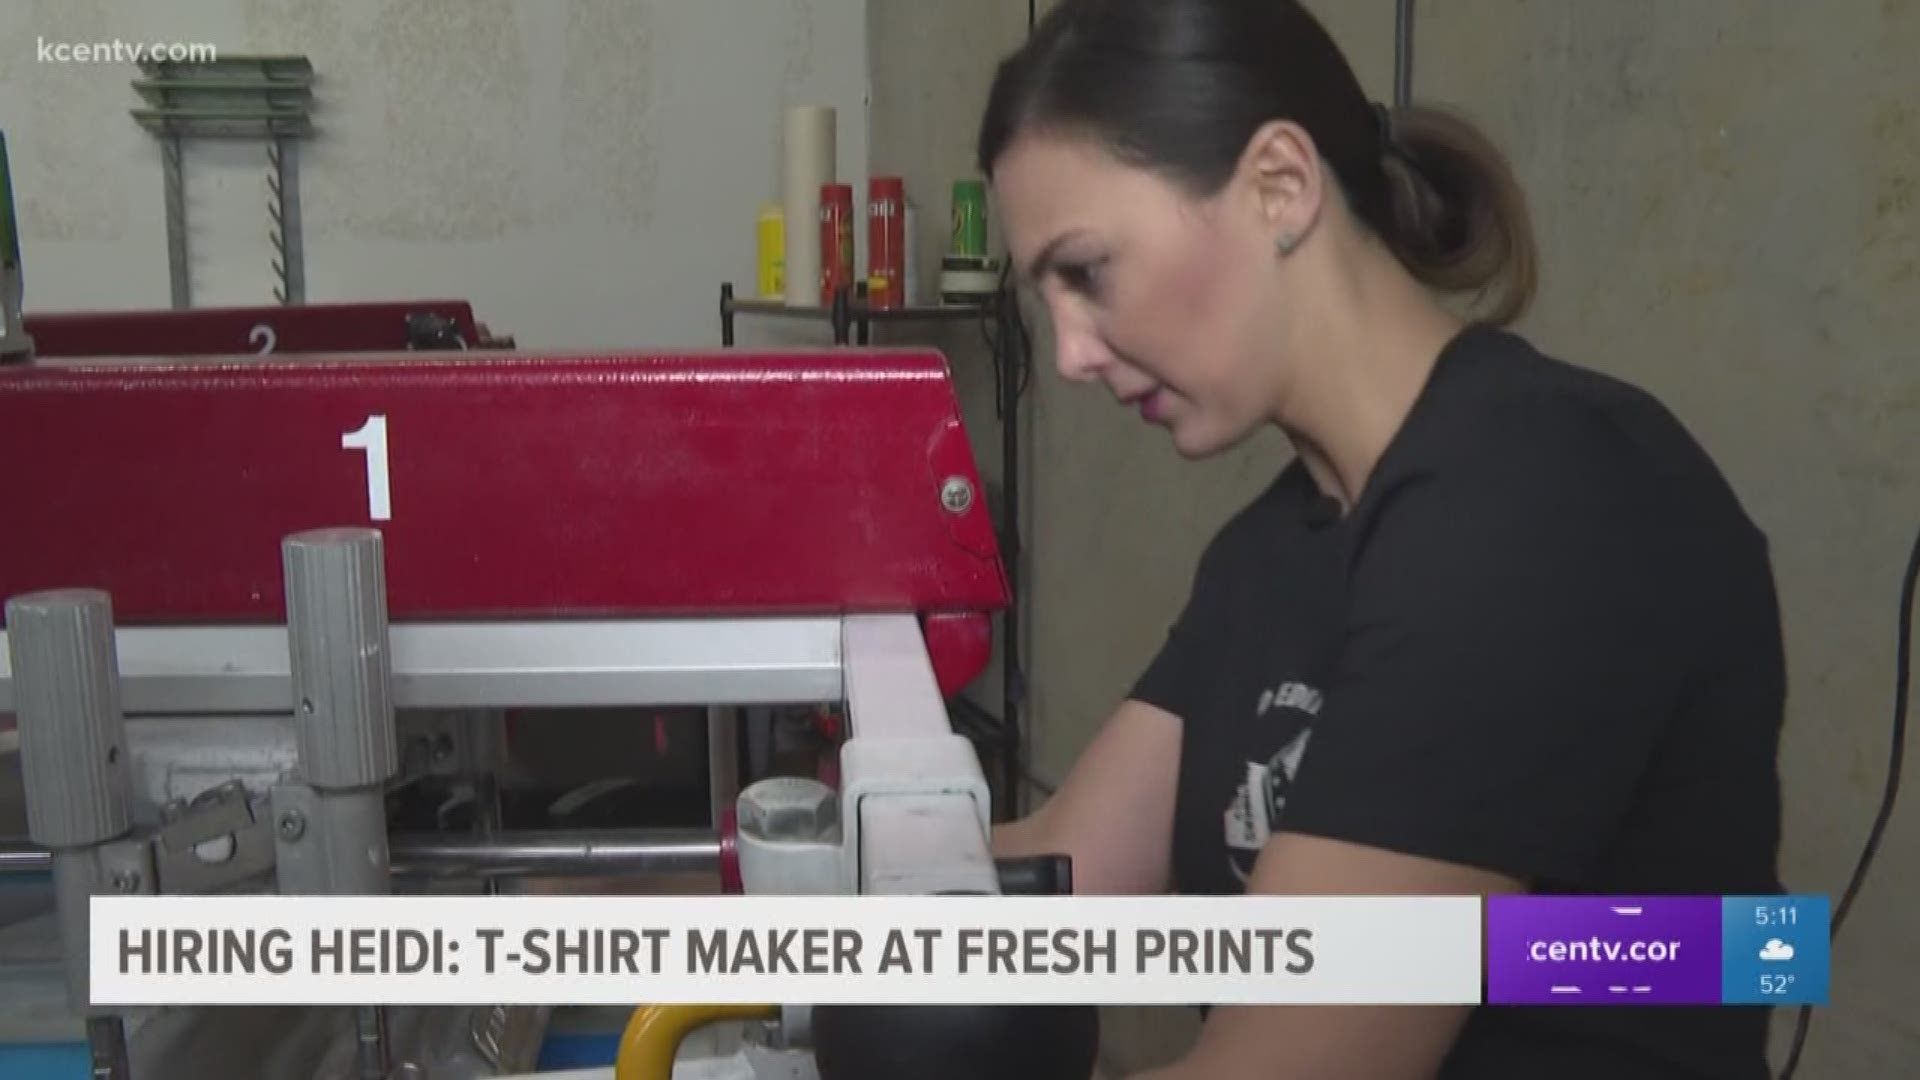 Texas Today anchor made her own custom T-shirts in this edition of Hiring Heidi.